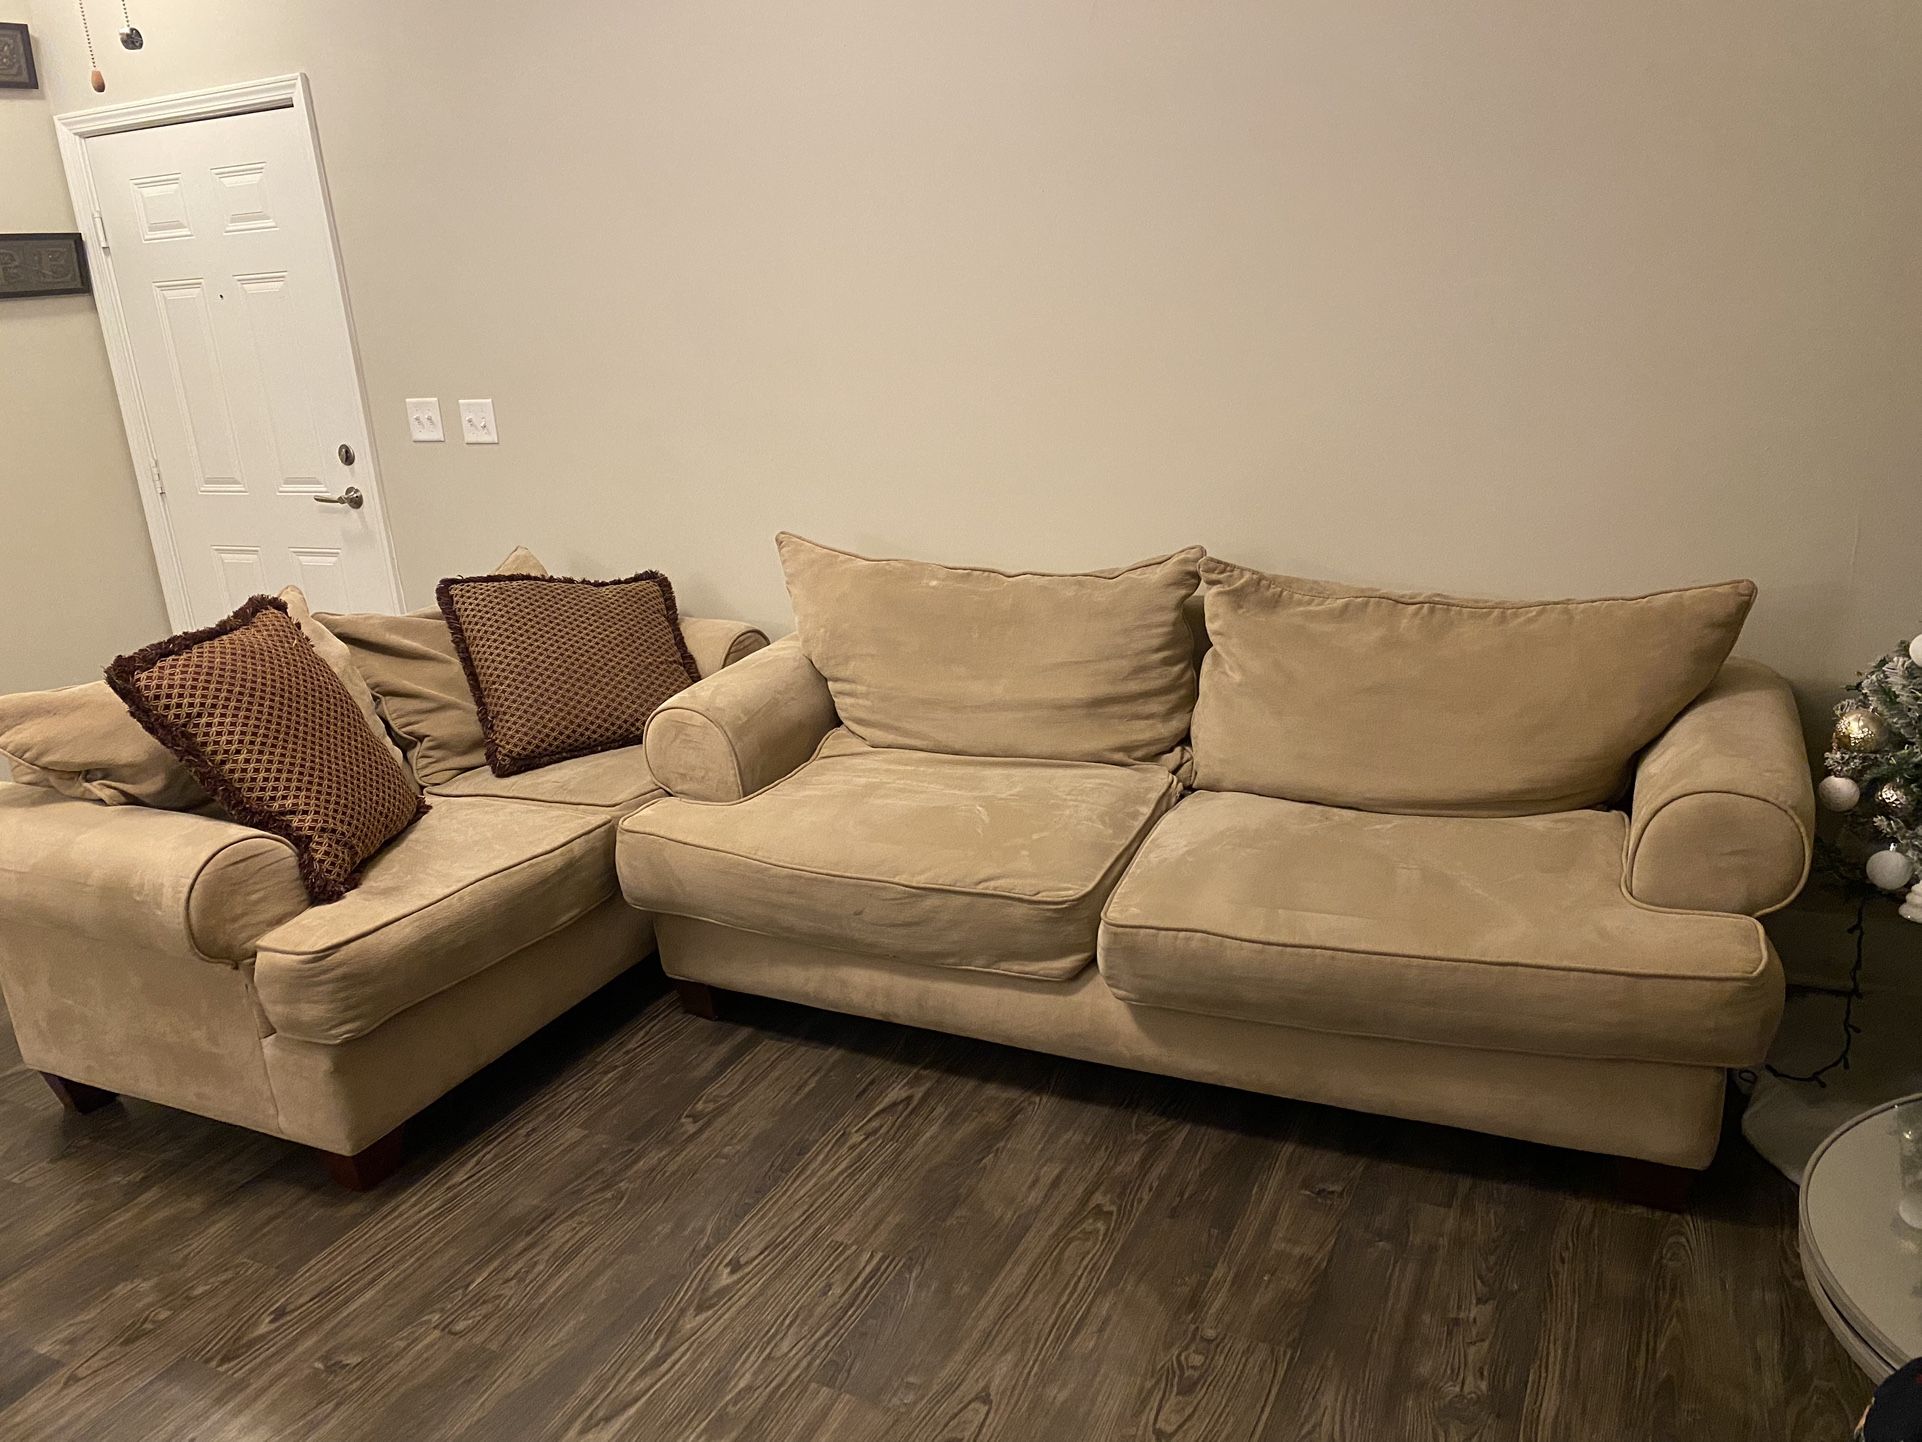 Couch For Sale . 350 Delivery Included 